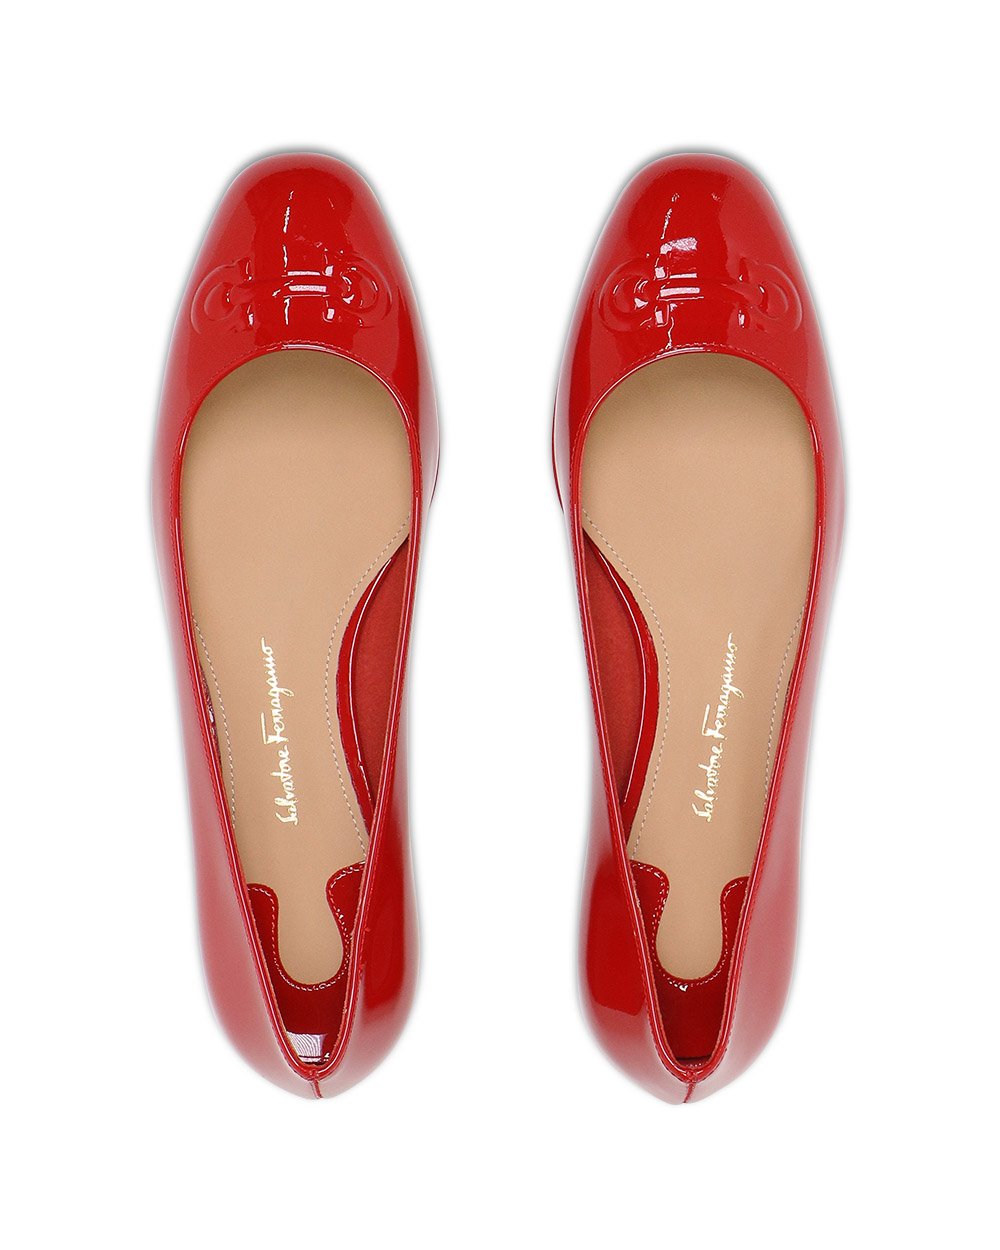 BRONI Patent Leather Casual Flats - ISSI Outlet